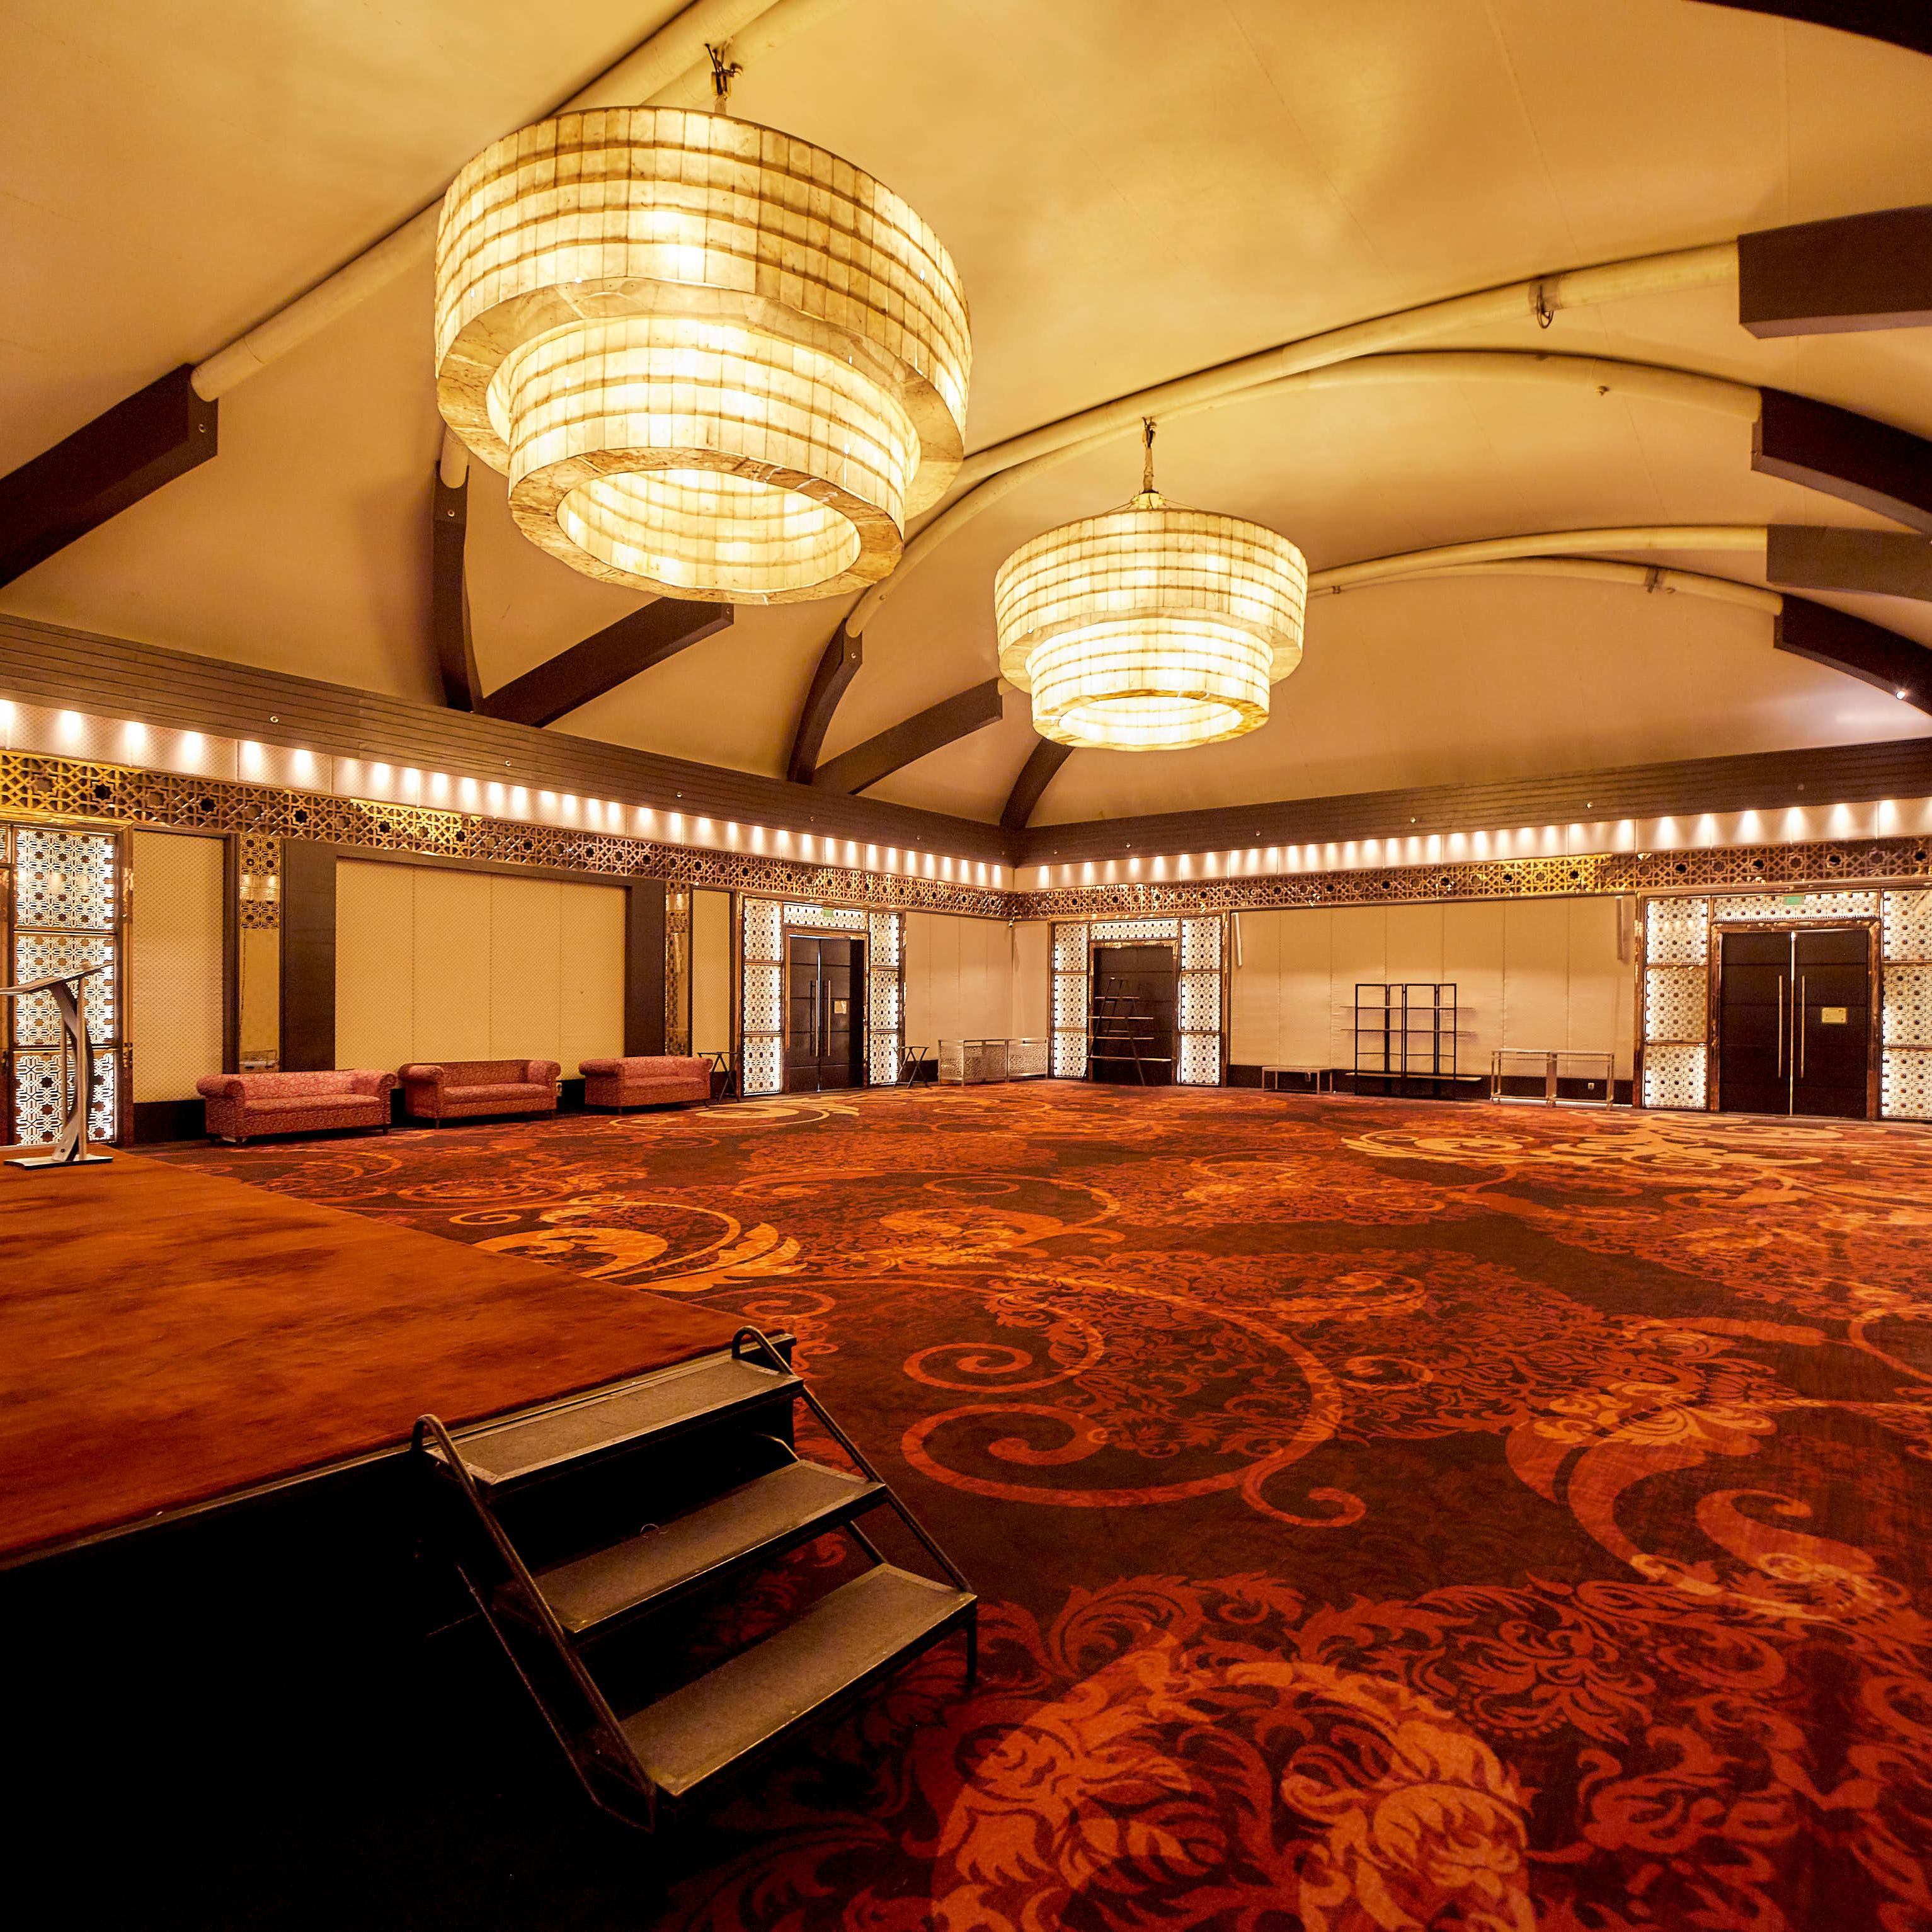 Emerald Ballroom on the third floor can host variety of events.